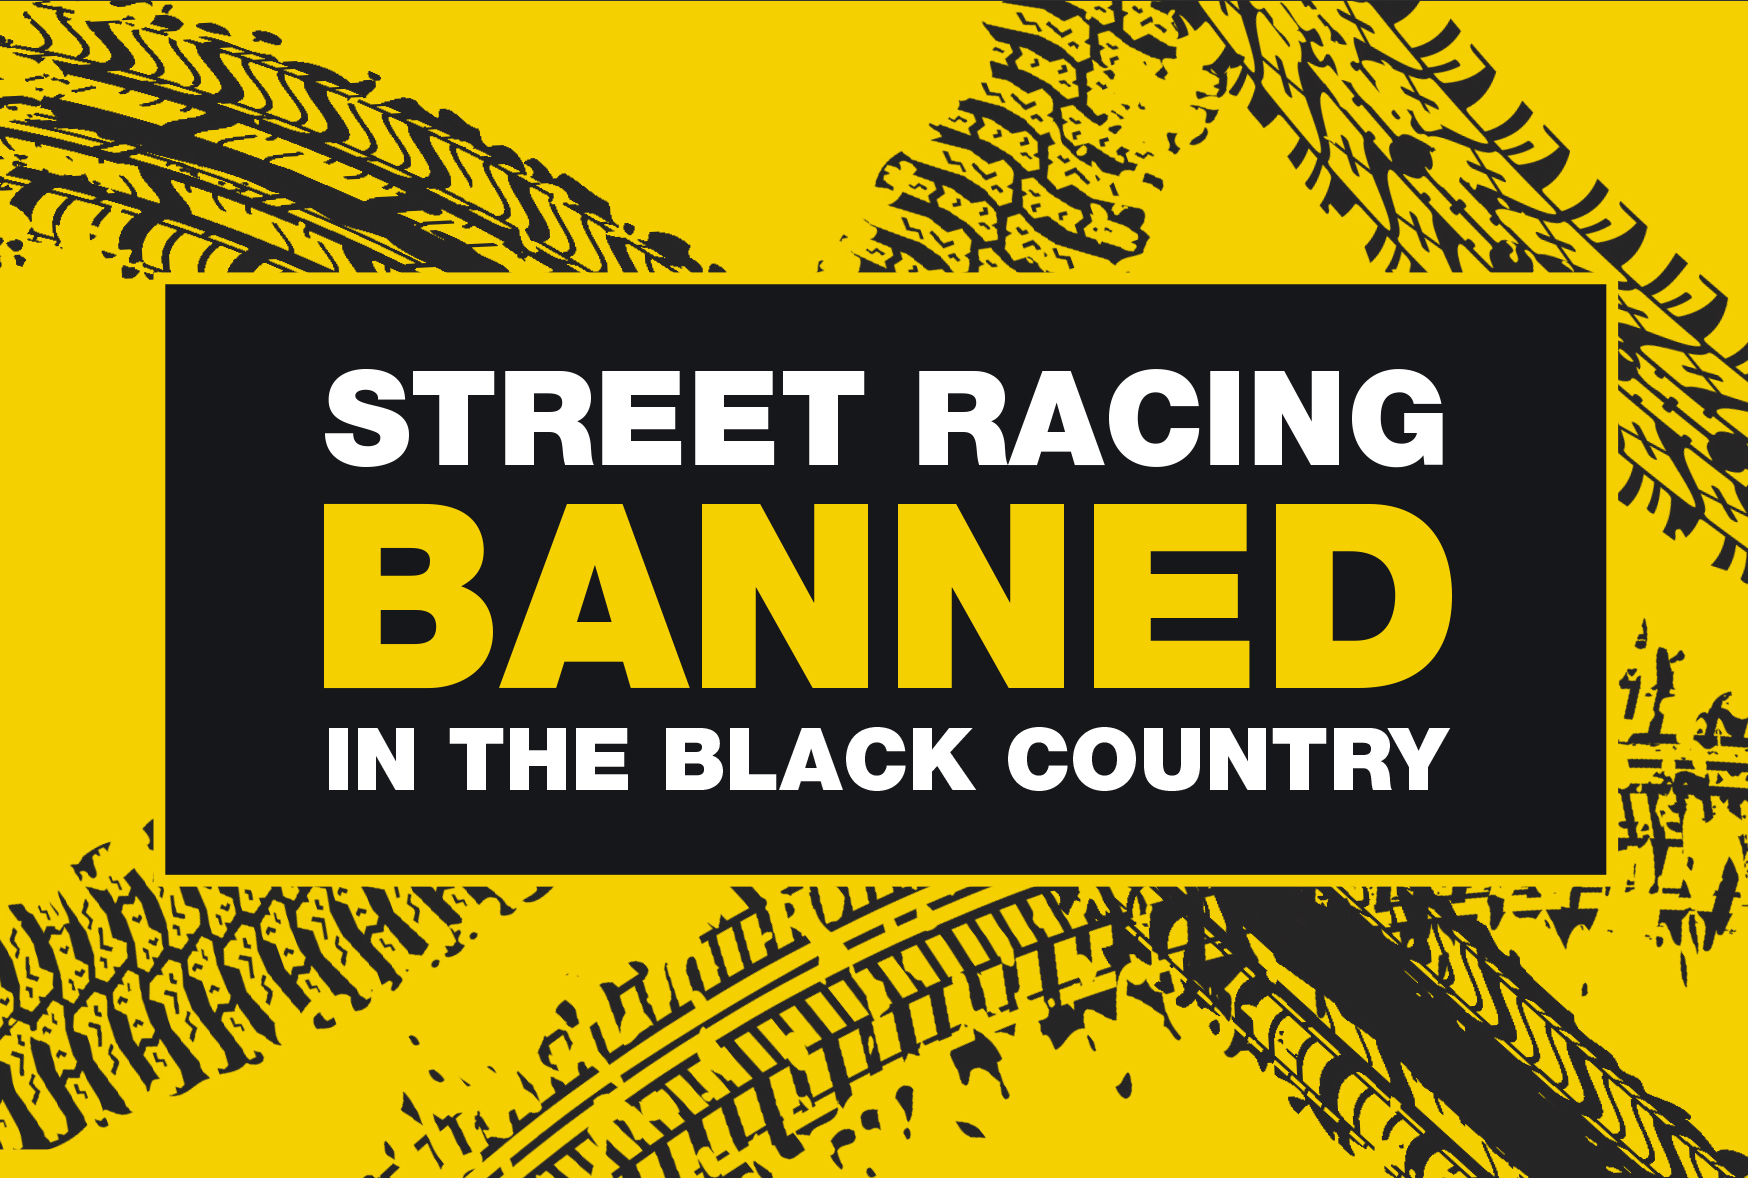 Image reads: Street racing banned in the Black Country. Image shows an illustration of tyre marks in the background.